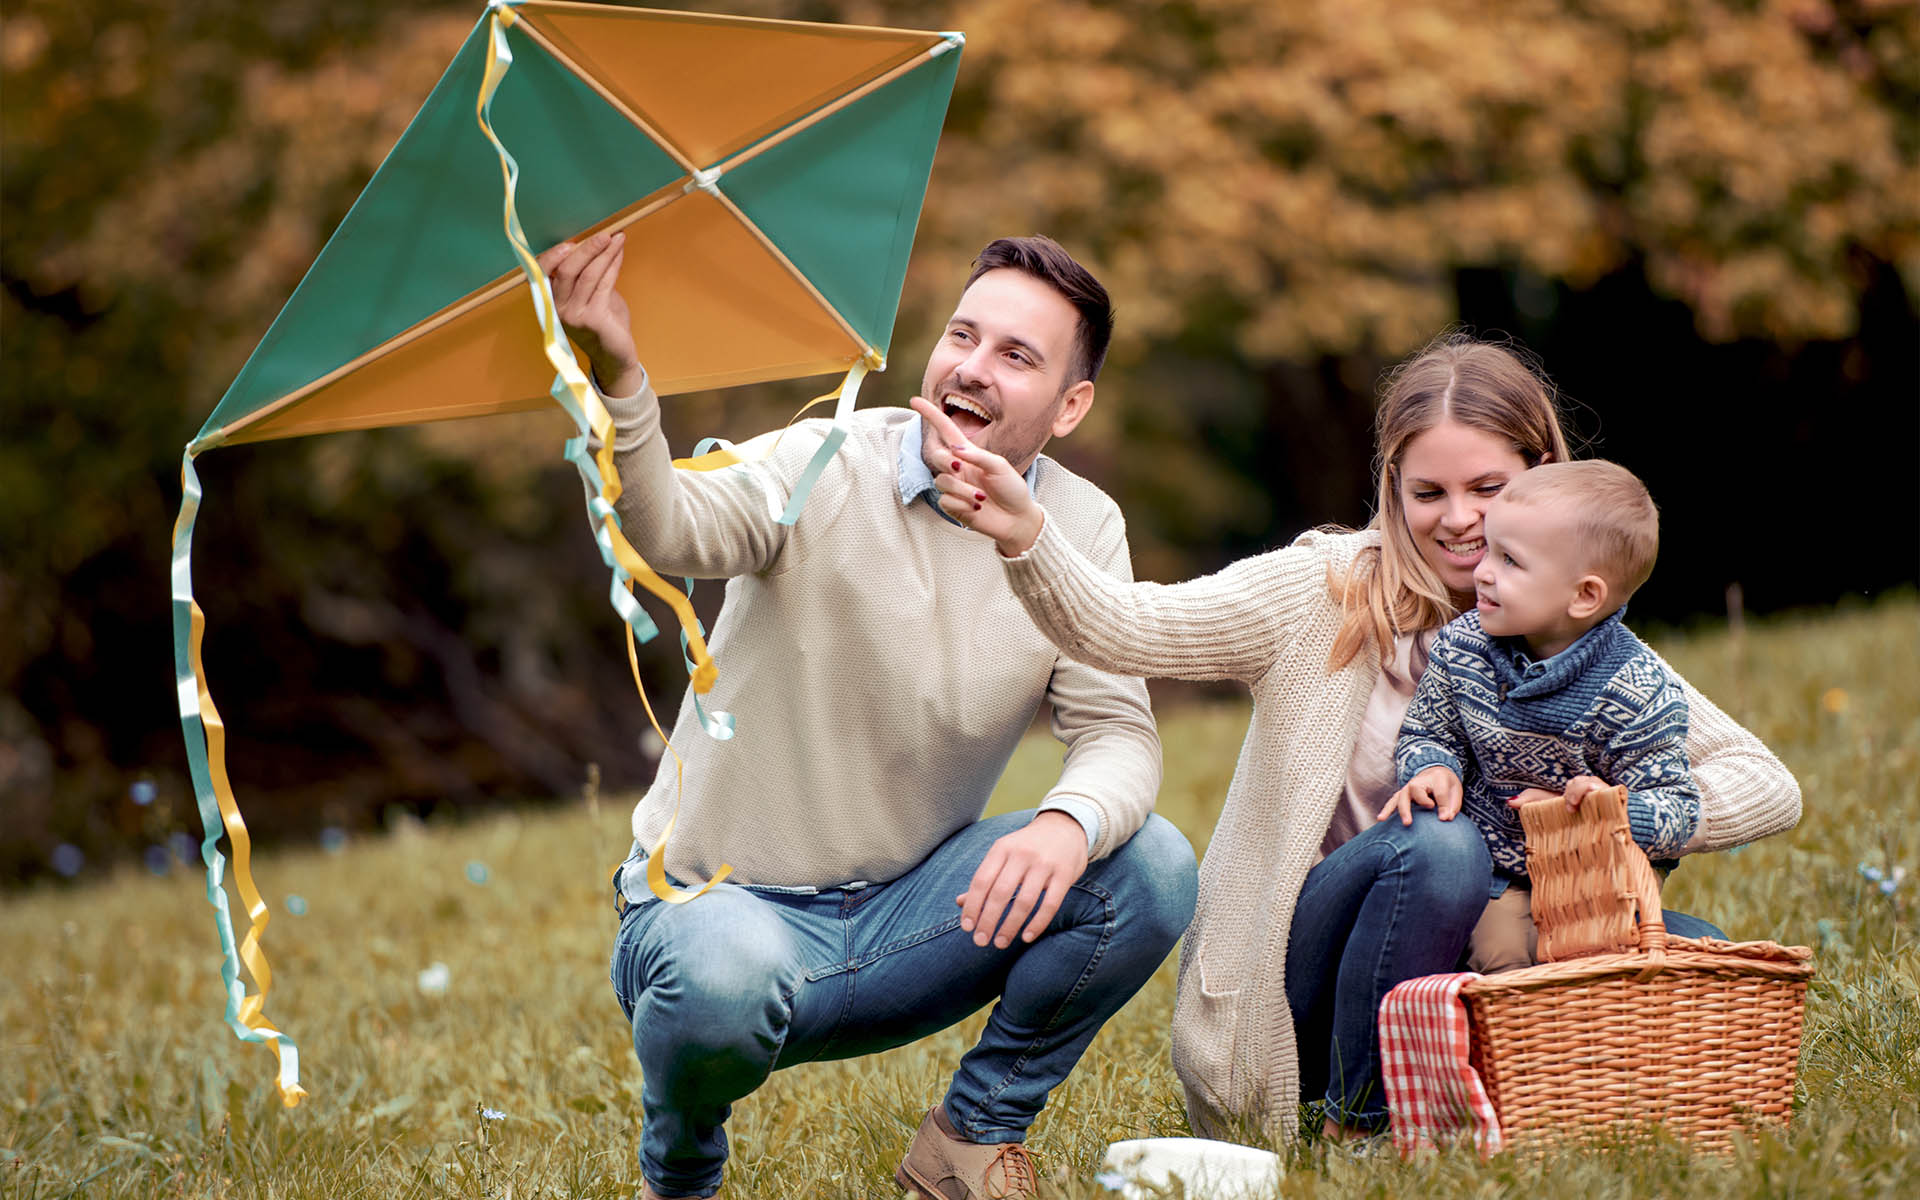 Homepage - Young Family Flying Kites Outside at the Park During Autumn